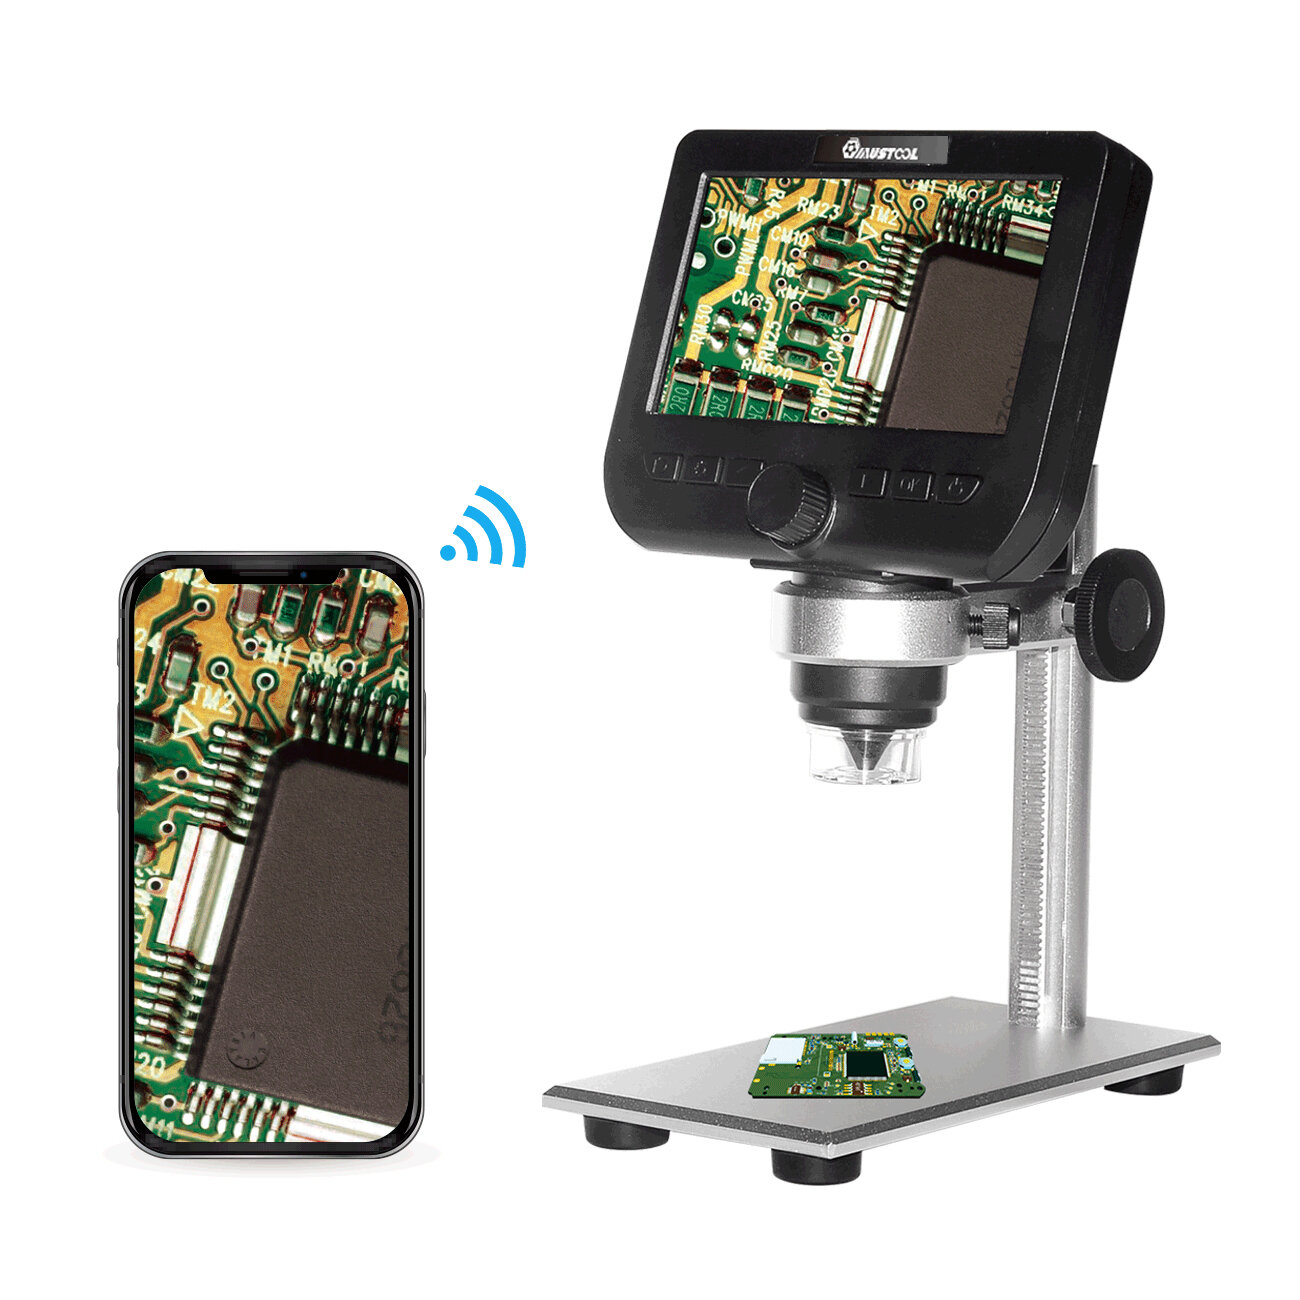 MUSTOOL G610 WIFI 2MP 4.3inch LCD Microscope Support IOS Android System Built-in Rechargeable Batter